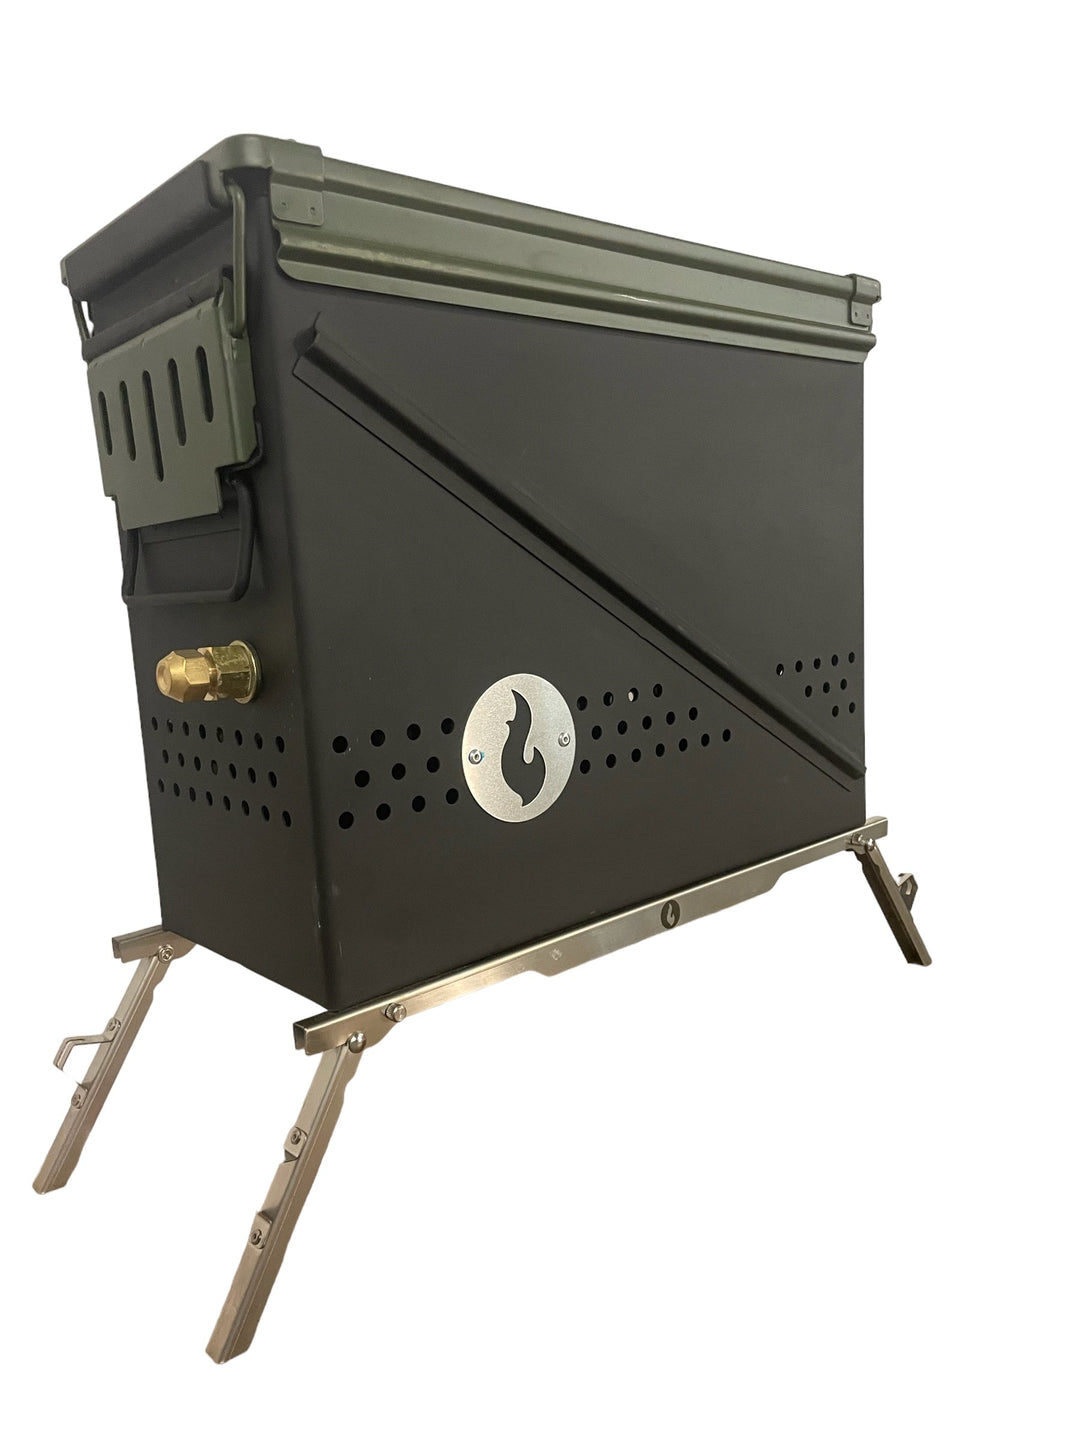 OUXL: Over/Under/Extra/Large Grill and Stand (Krakatoa Size)